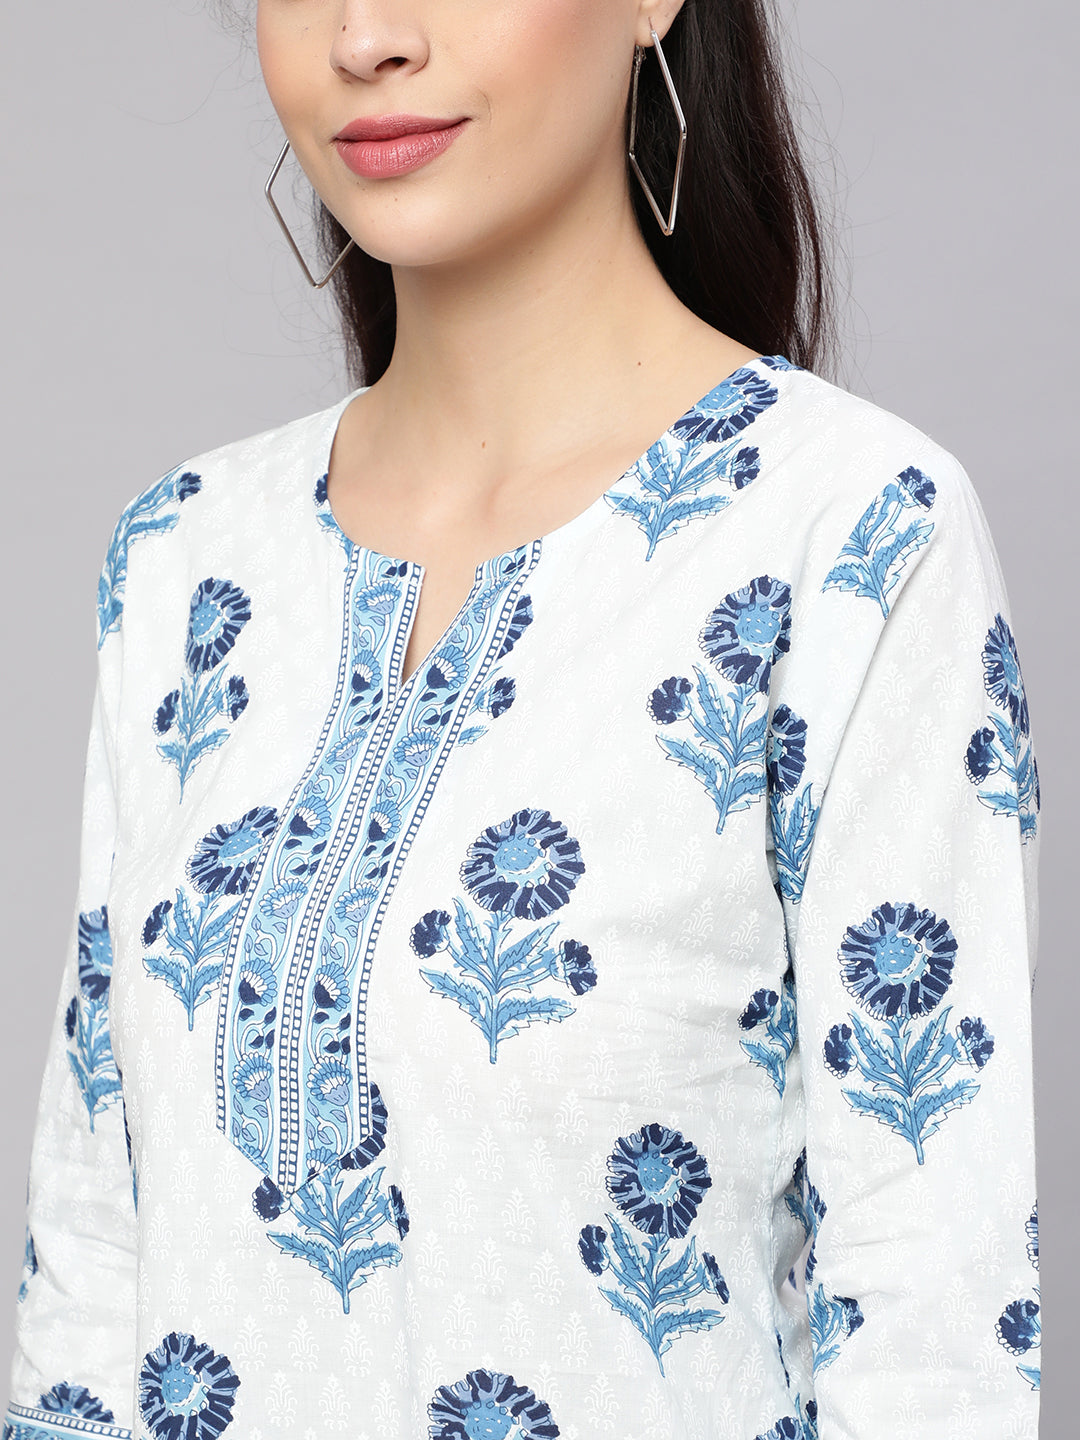 Women's Off White Printed Straight Tunic With Three Quarter Sleeves - Nayo Clothing